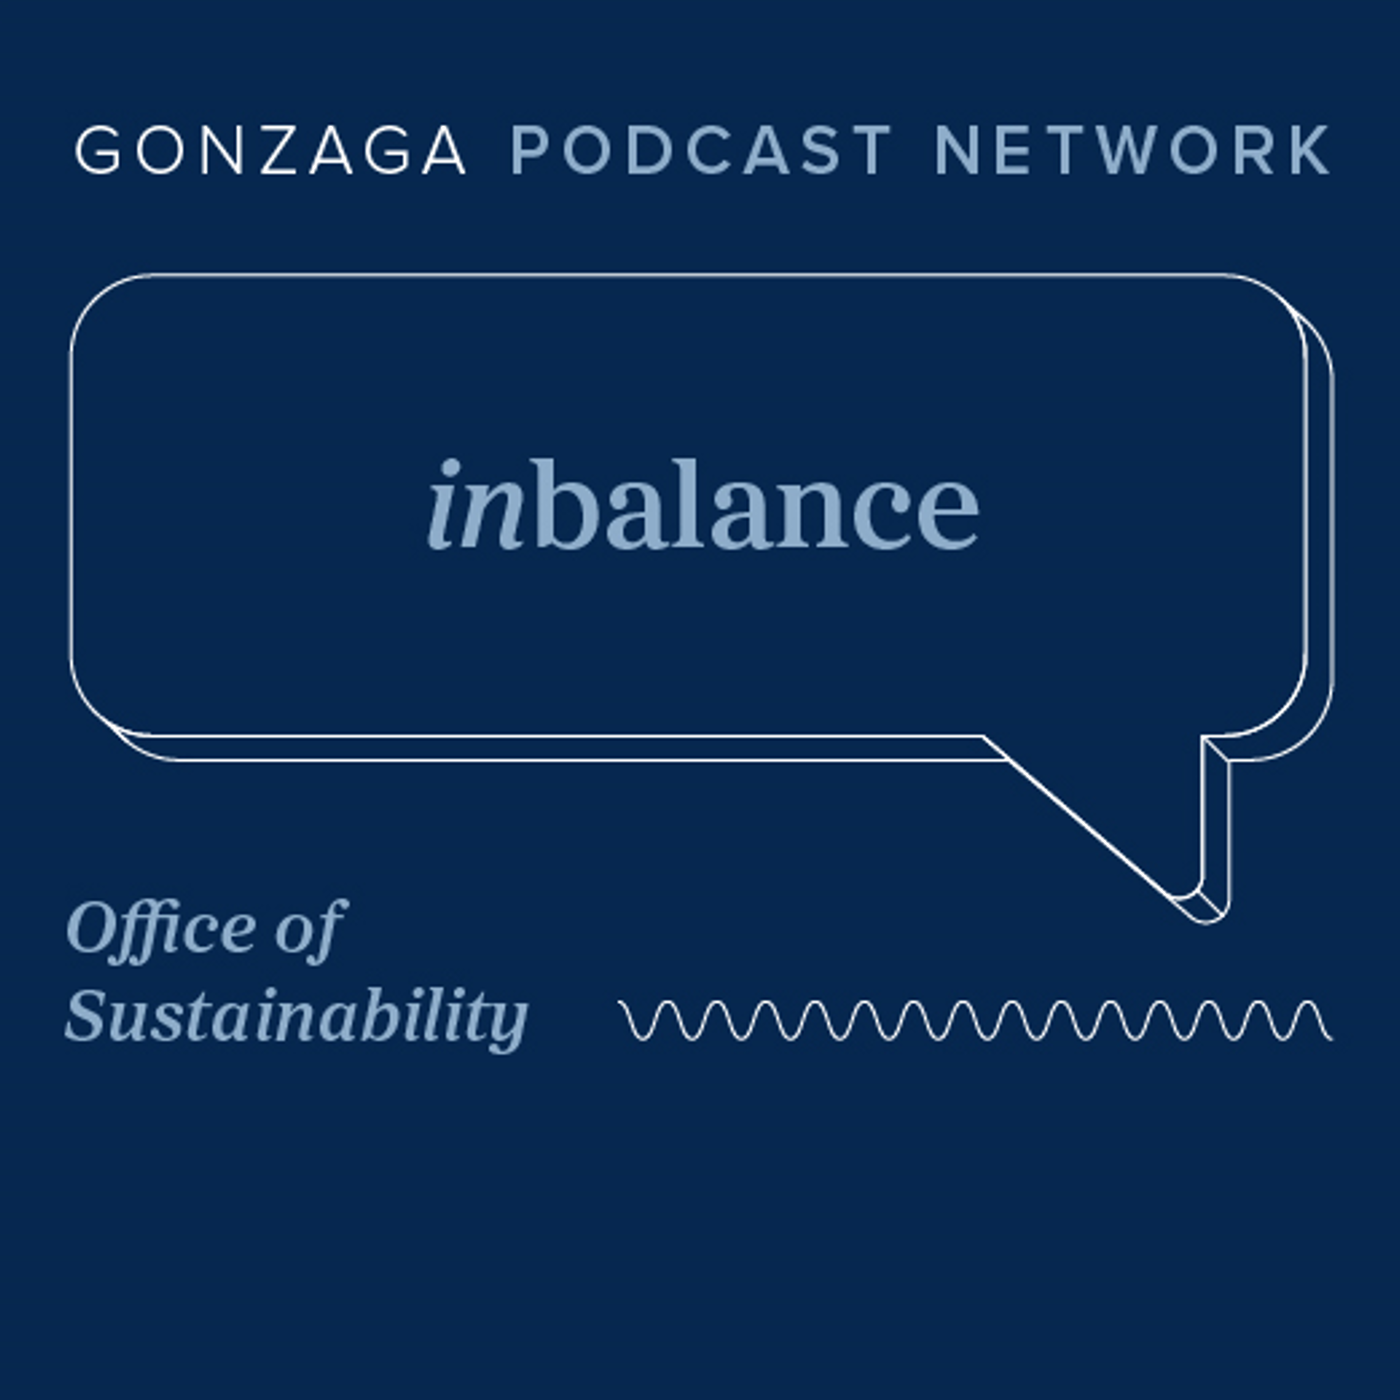 Season 2 - Episode 5: Towards Mission Alignment: A discussion on divestment, equity, and intersectional environmentalism at Gonzaga